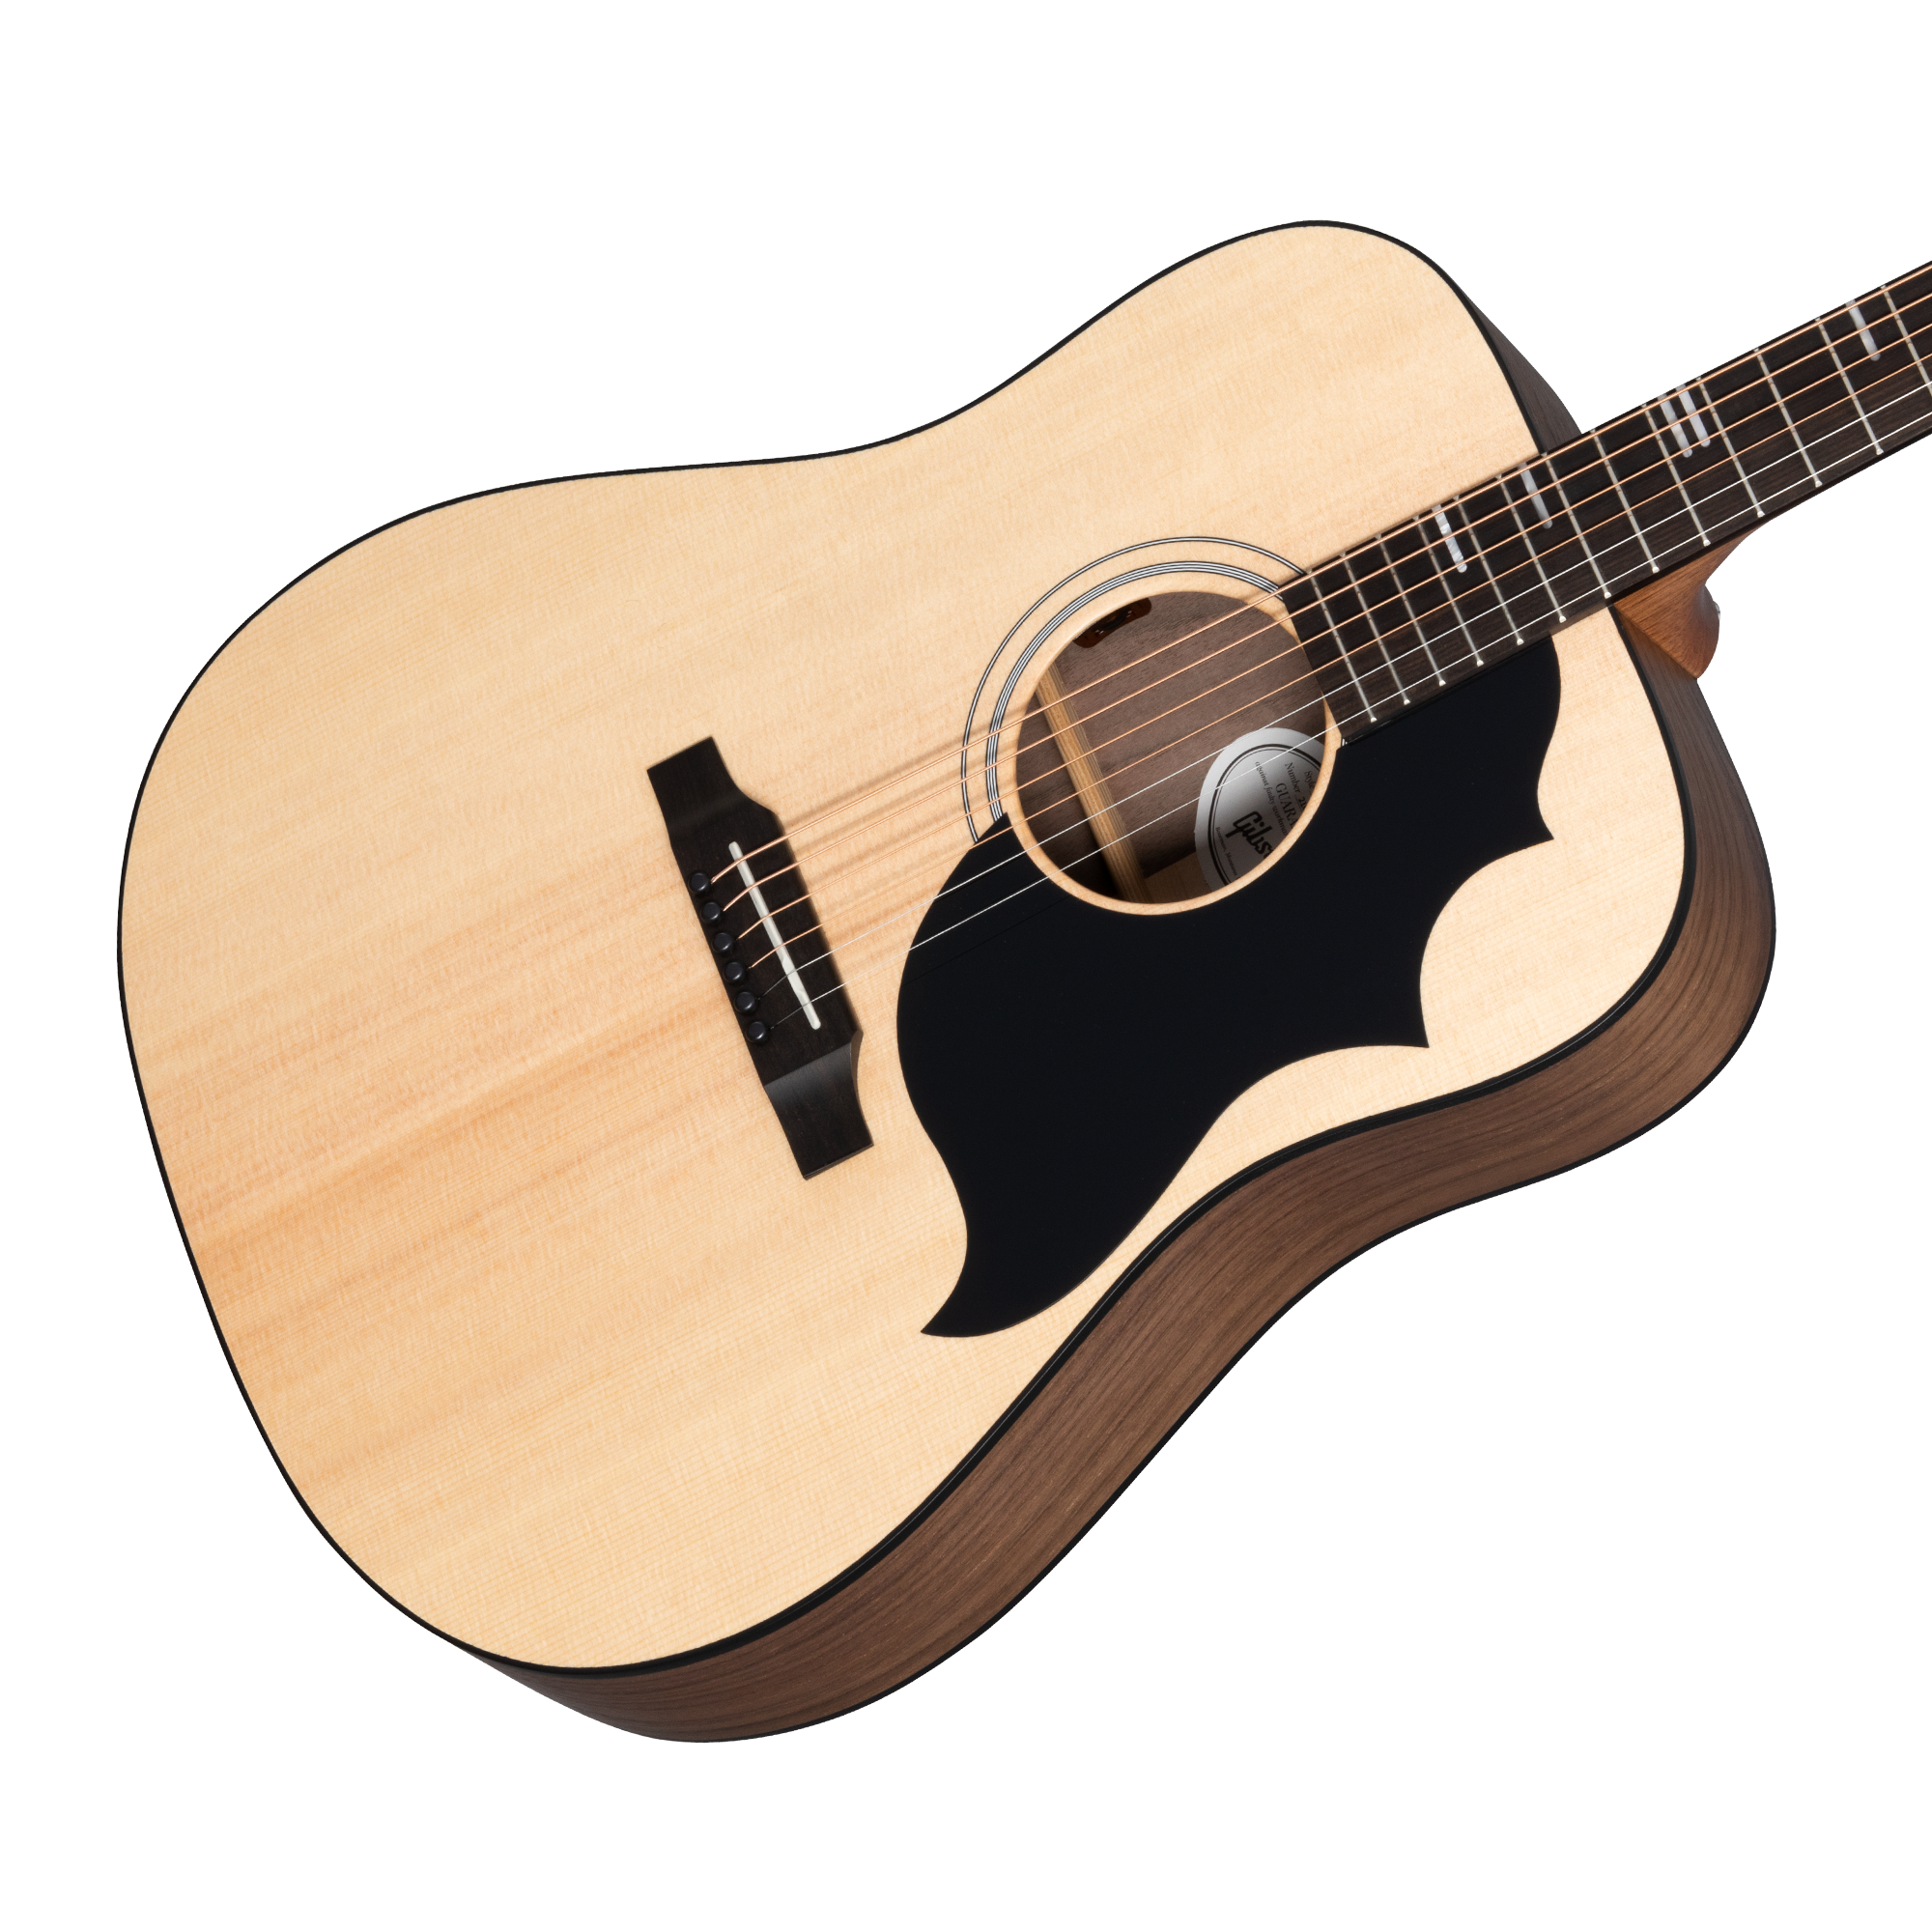 Gibson Generation Collection G-Bird, Natural Finish, Acoustic Guitar